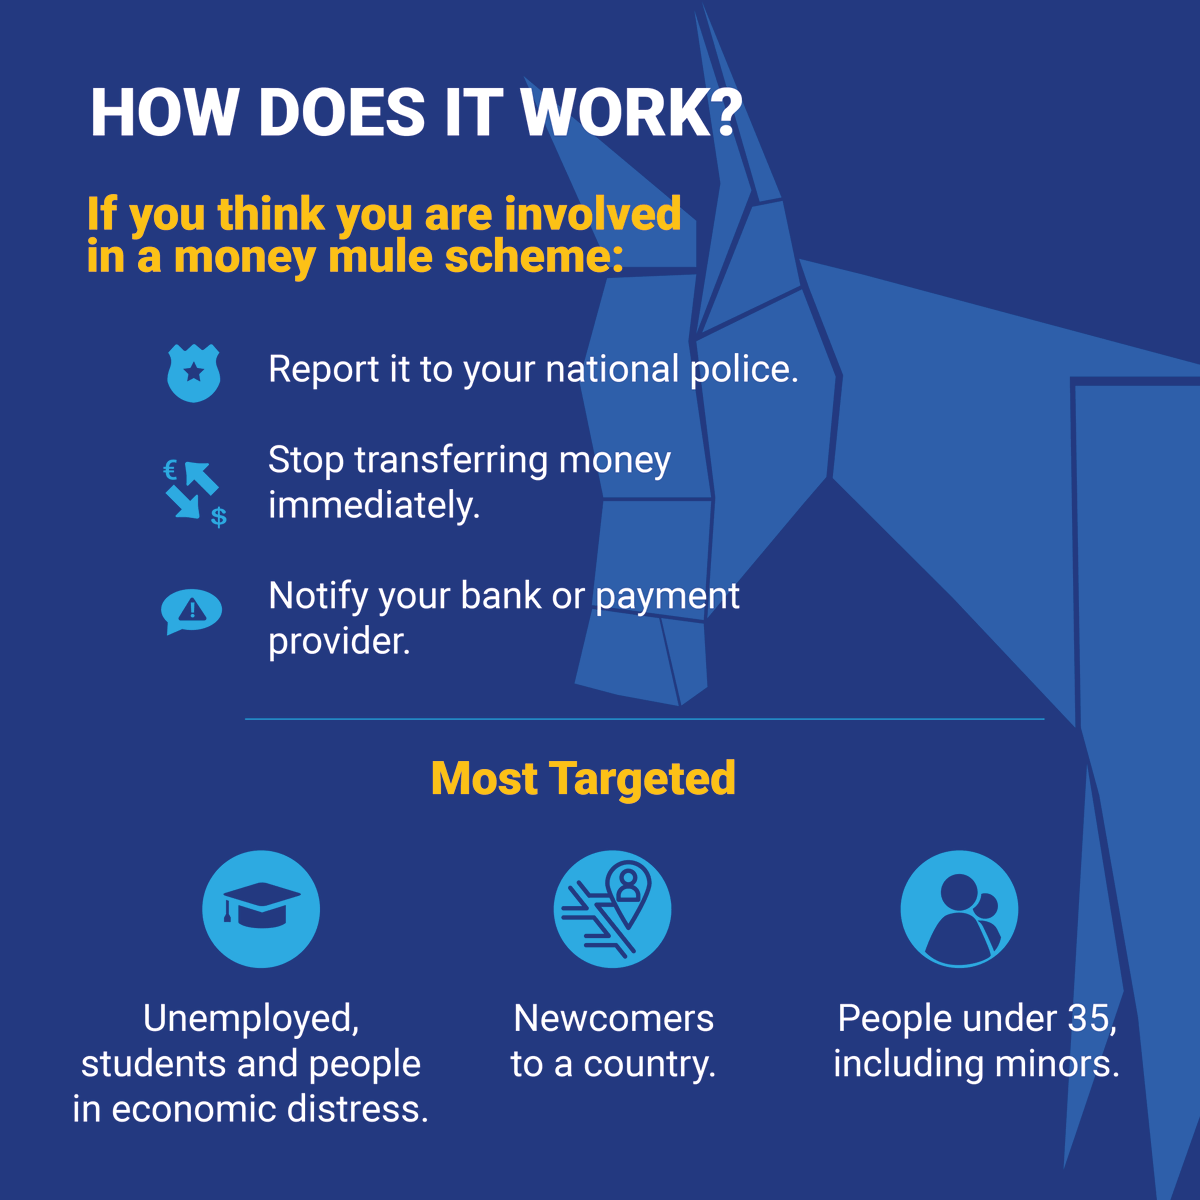 Easy money always comes from crime. The EMMA initiative has successfully strengthened bolstering cross-border collaboration to combat and dismantle money mule networks engaged in international money laundering. 📣 (1/2) europol.europa.eu/media-press/ne… #dontbeamule